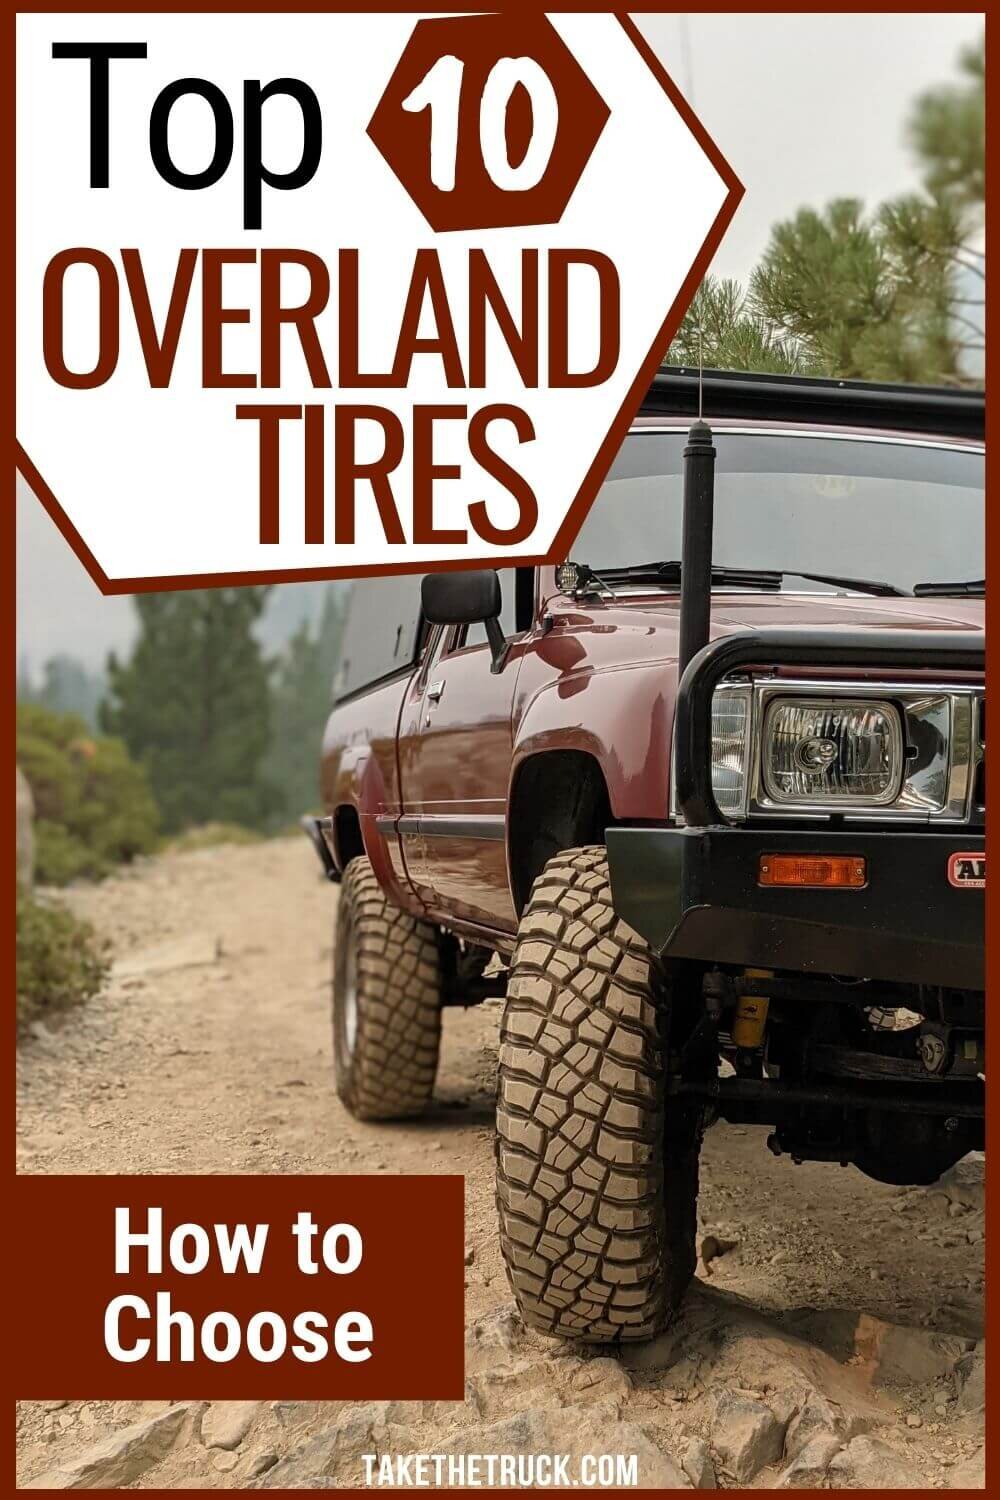 Find overland tires or off road tires for your overlanding vehicle. Know how to choose between all terrain truck tires, hybrid tires, or mud terrain tires - plus 10 specific overlanding tires!